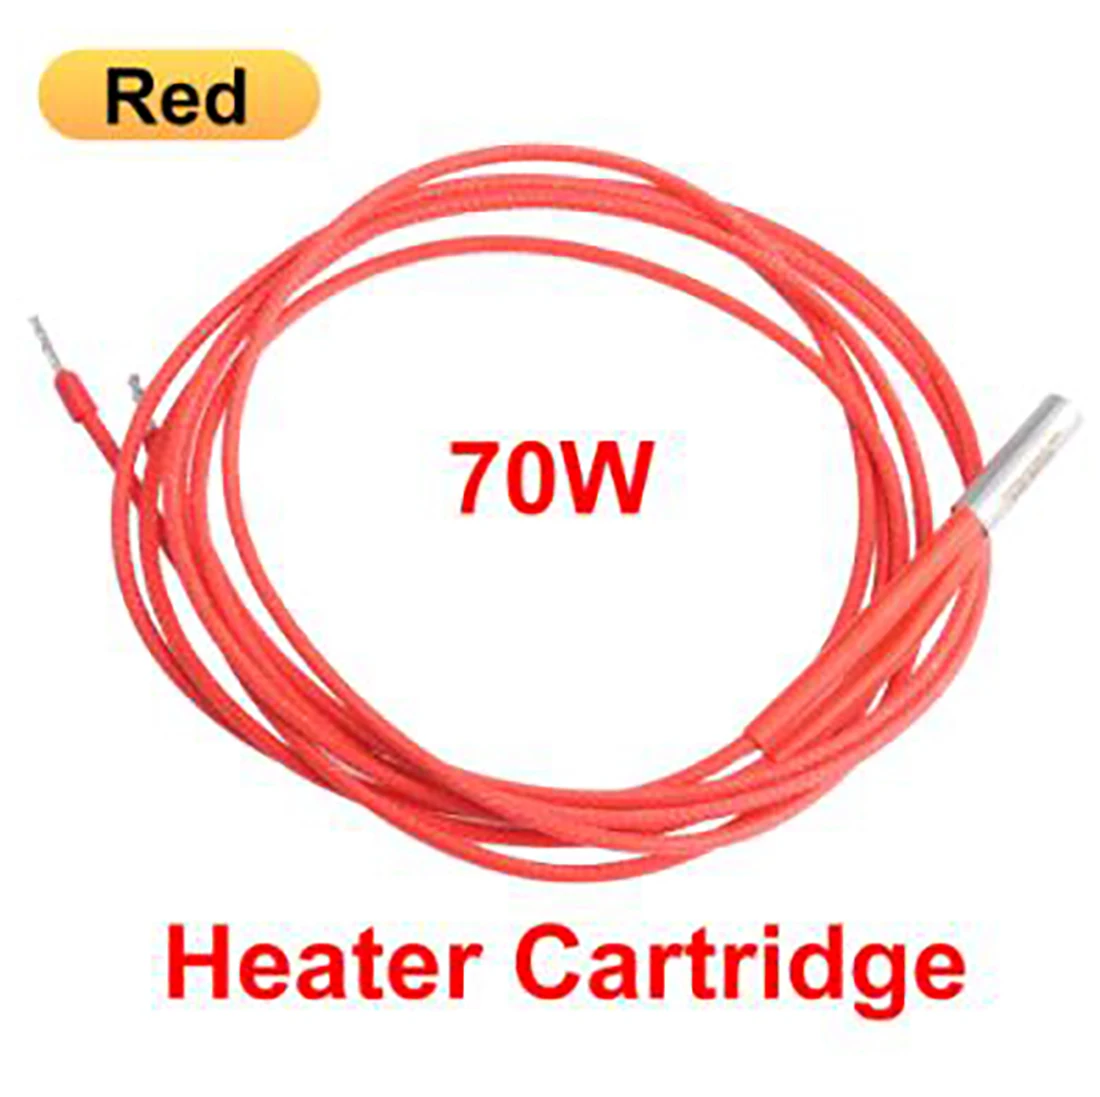 

24V 70W Heater Cartridge Red 6x20mm With 100CM cable 3D Printer for V6 HOTEND Volcano MK8 MK9 CR-10 ender 3